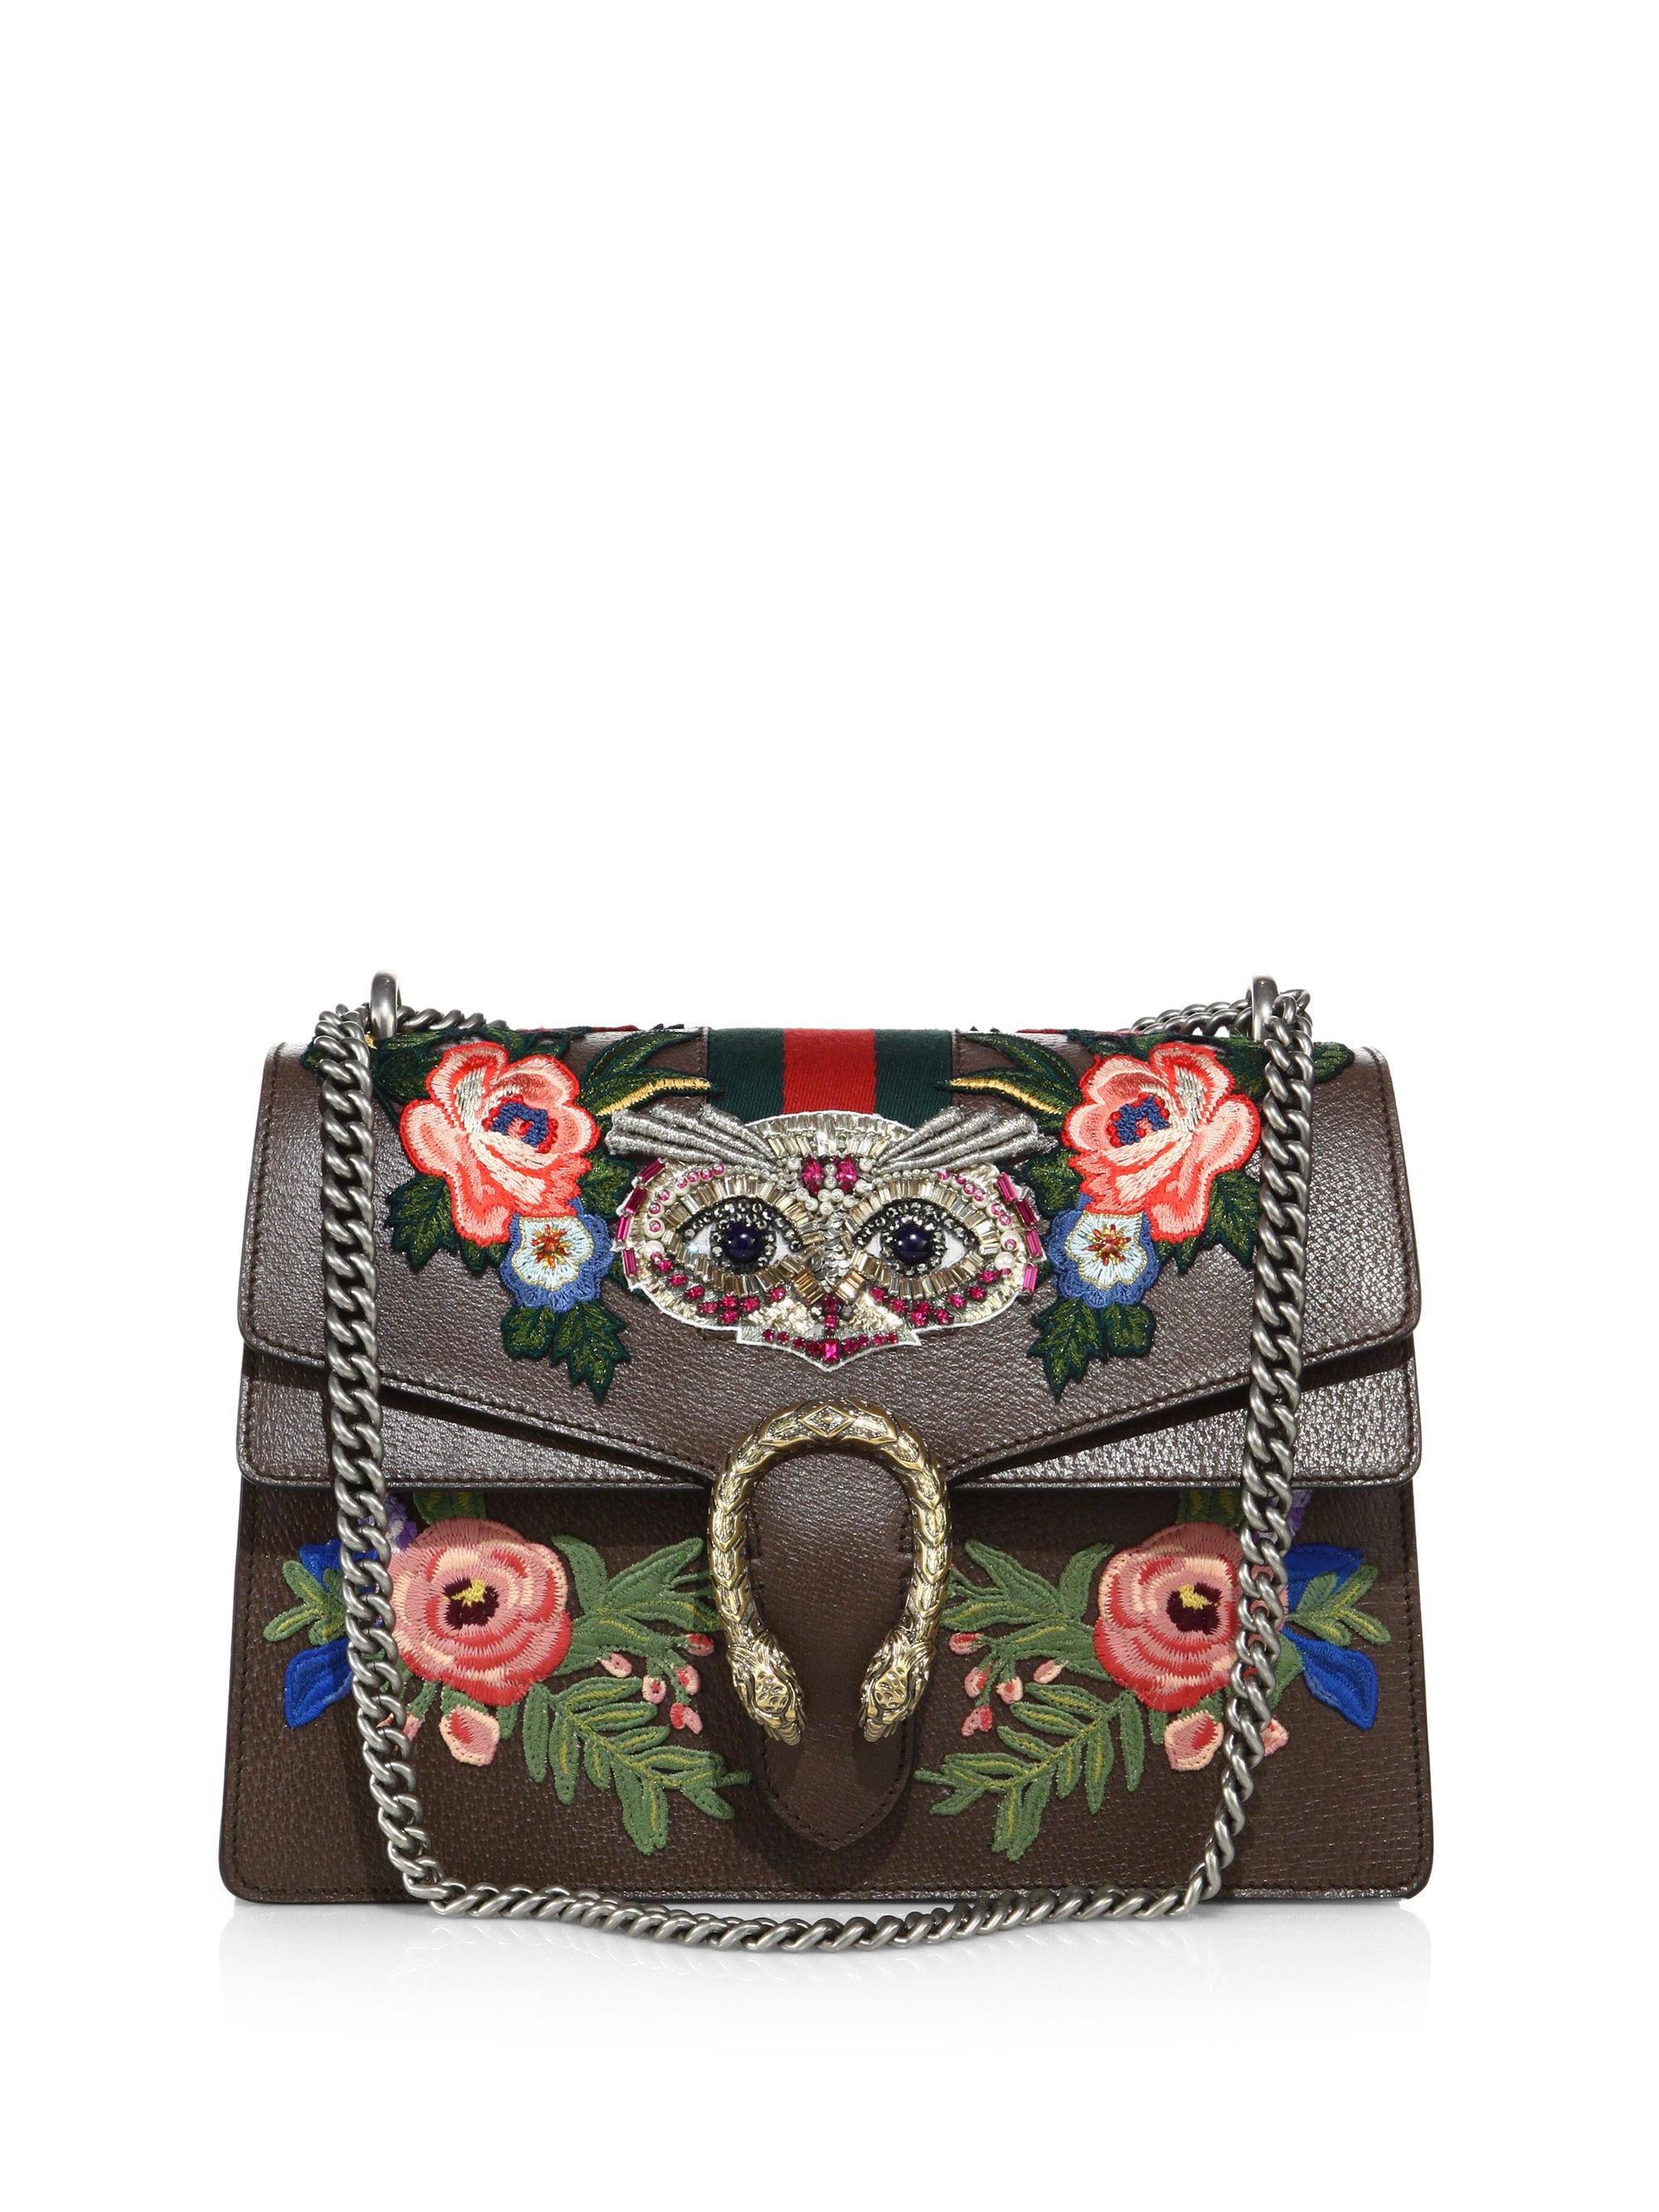 Lyst - Gucci Dionysus Medium Embroidered Metallic Leather Shoulder Bag in Gray